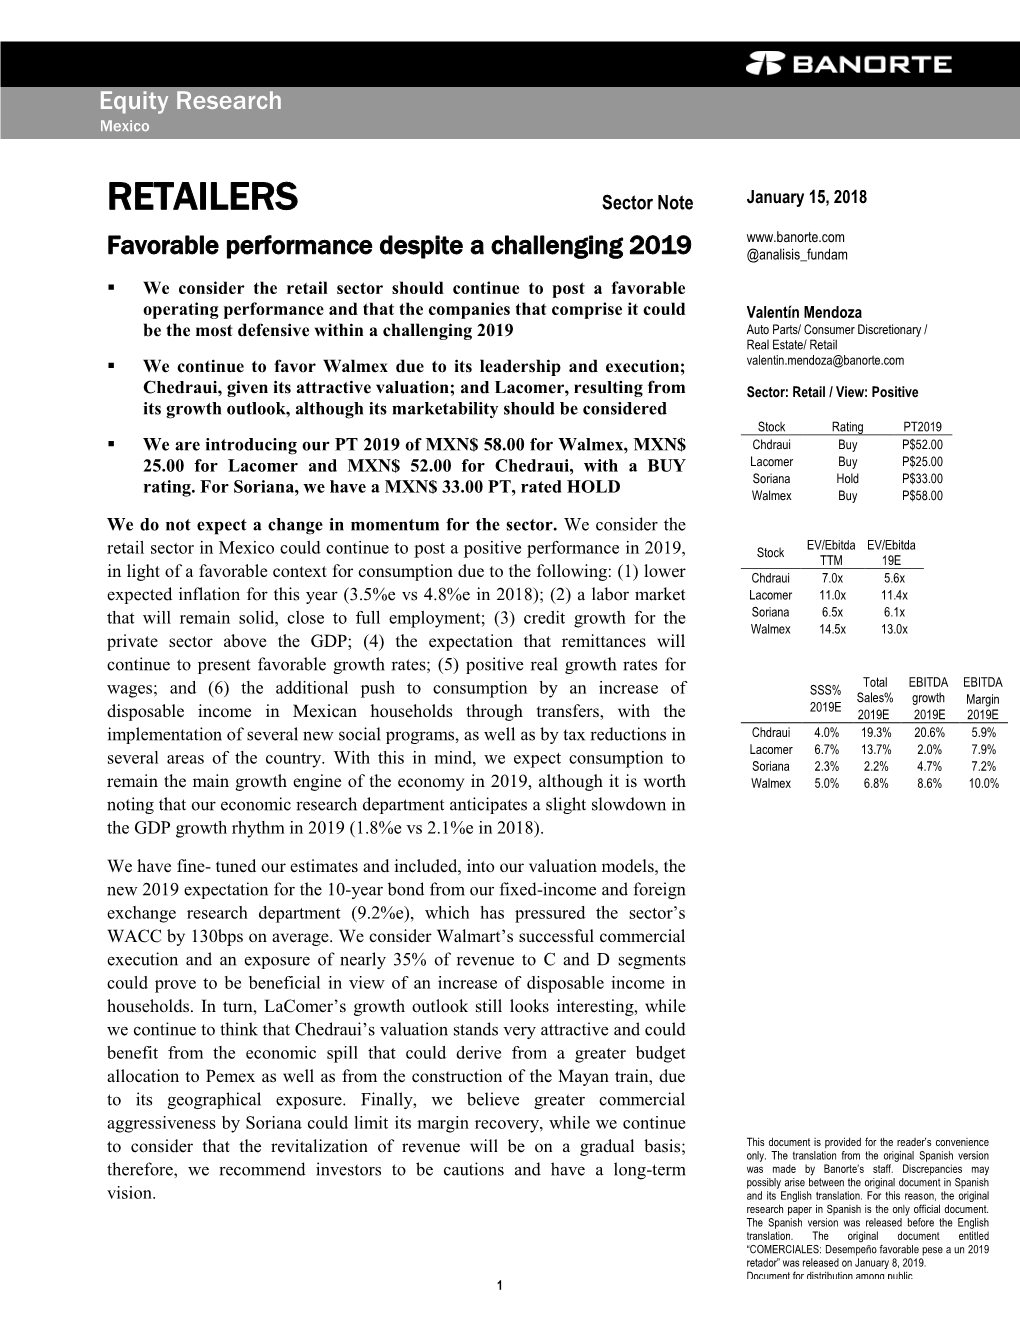 RETAILERS Sector Note January 15, 2018